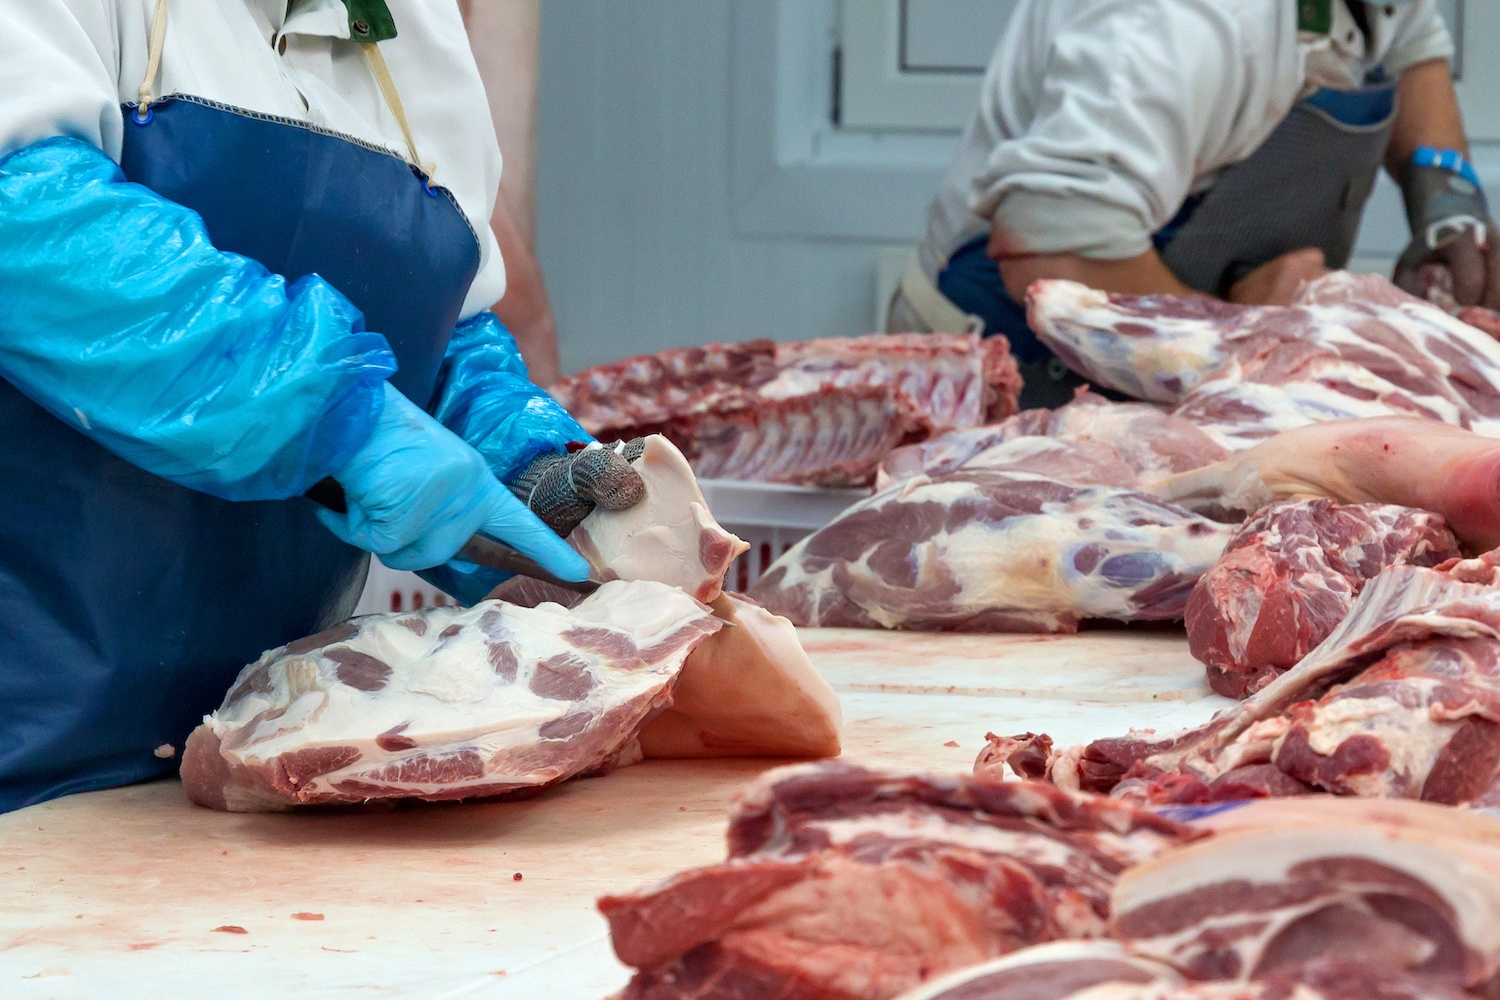 Butchers are cutting pork in the meat plant. September 2020